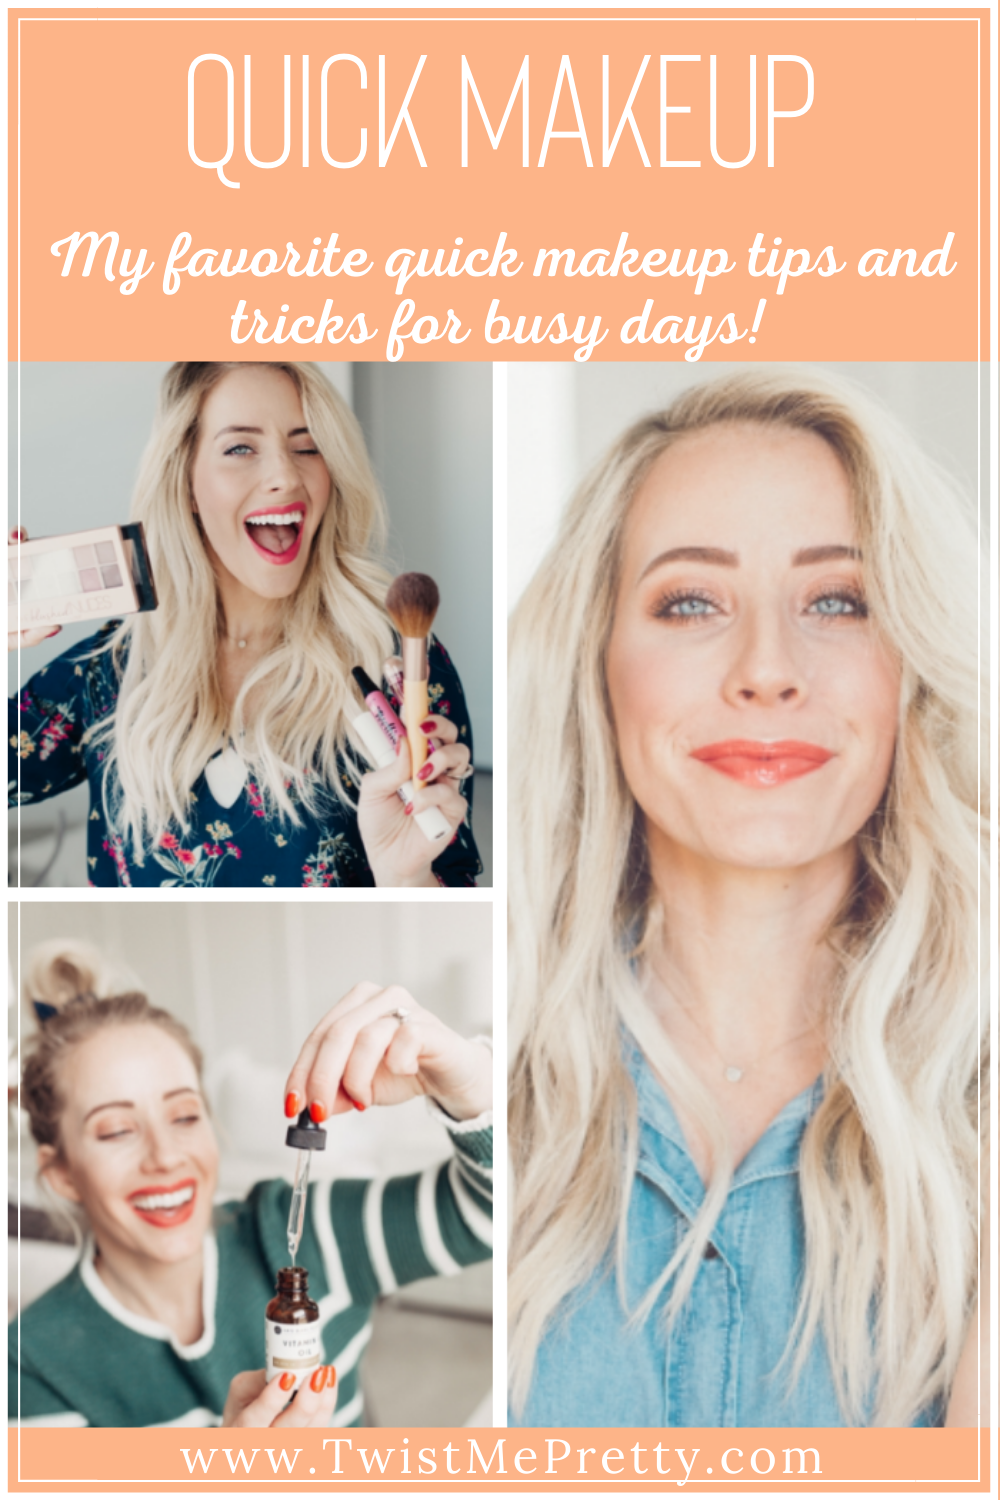 Quick Makeup- My favorite quick makeup tips and tricks for busy days! www.twistmepretty.com